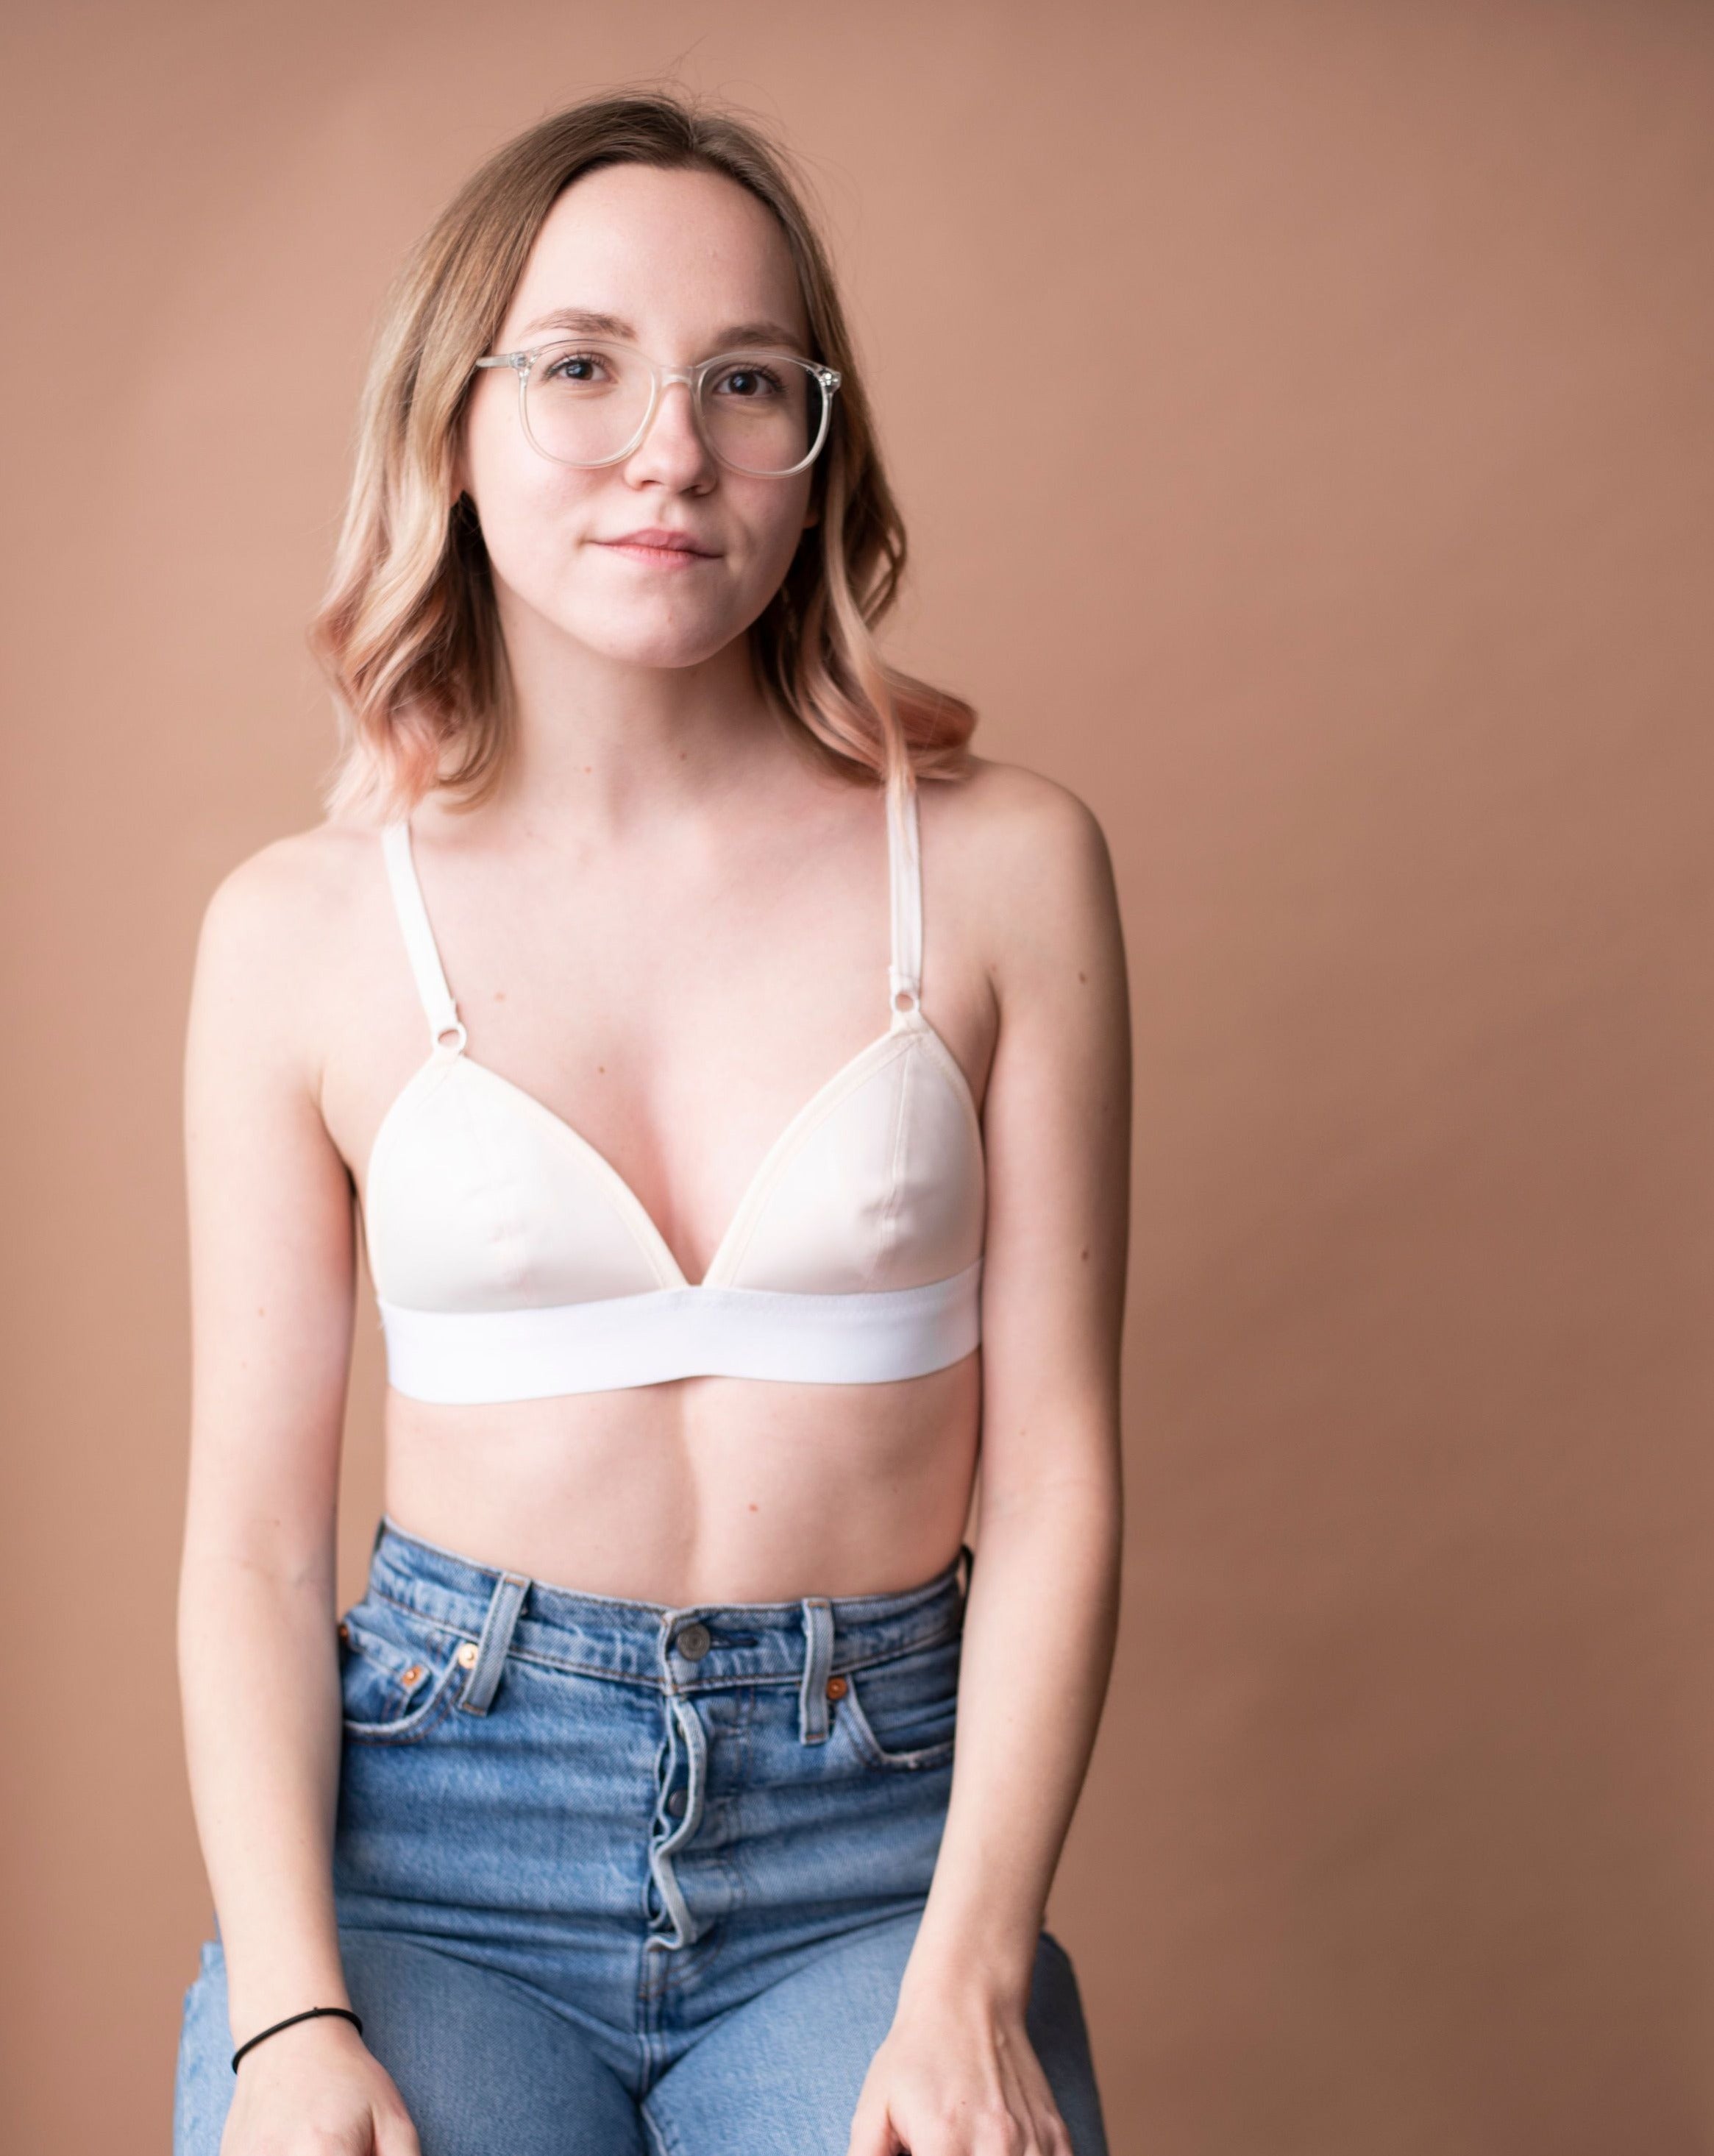 Haley from Rubies Bras, a female with medium blond hair wearing a peach and white wirefree bra from our petites collection styled with blue jeans. Half body shot on copper back drop.